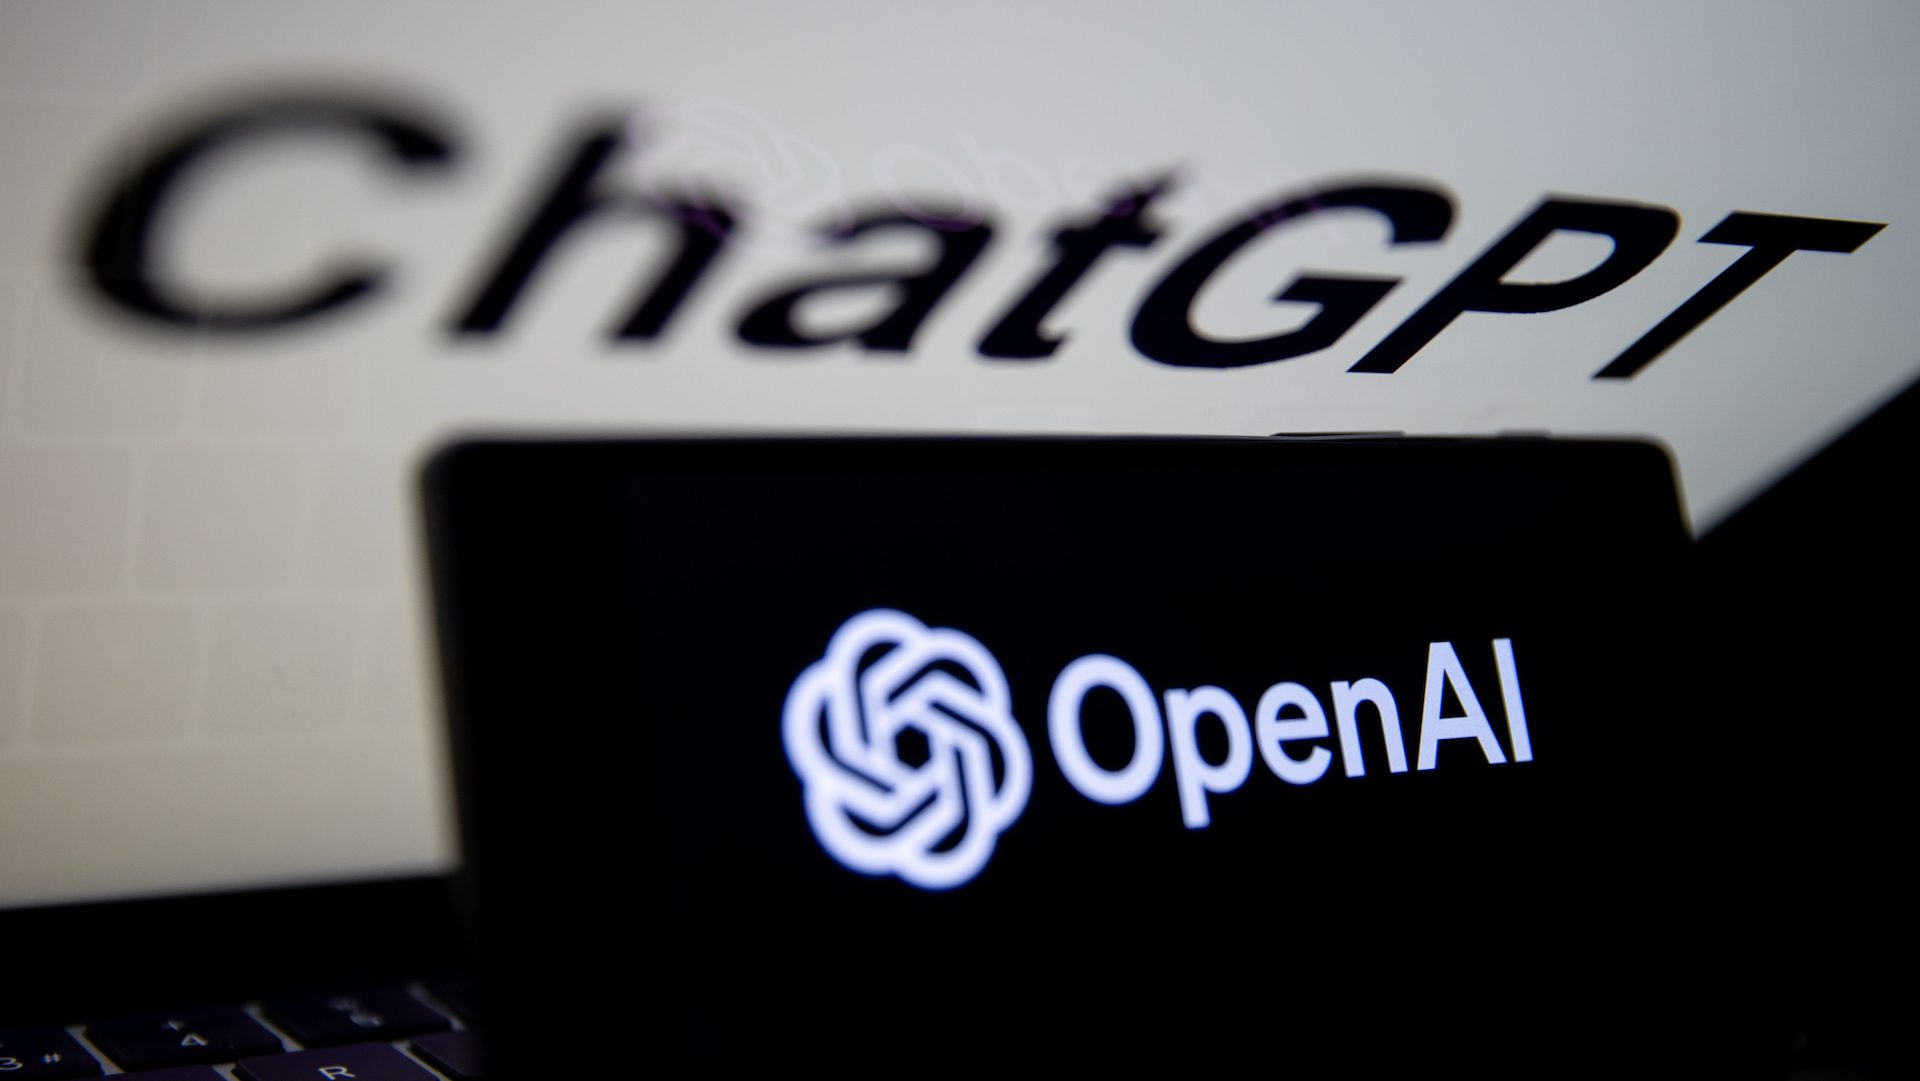 OpenAI logo is displayed on mobile phone screen in front of computer screen with ChatGPT logo